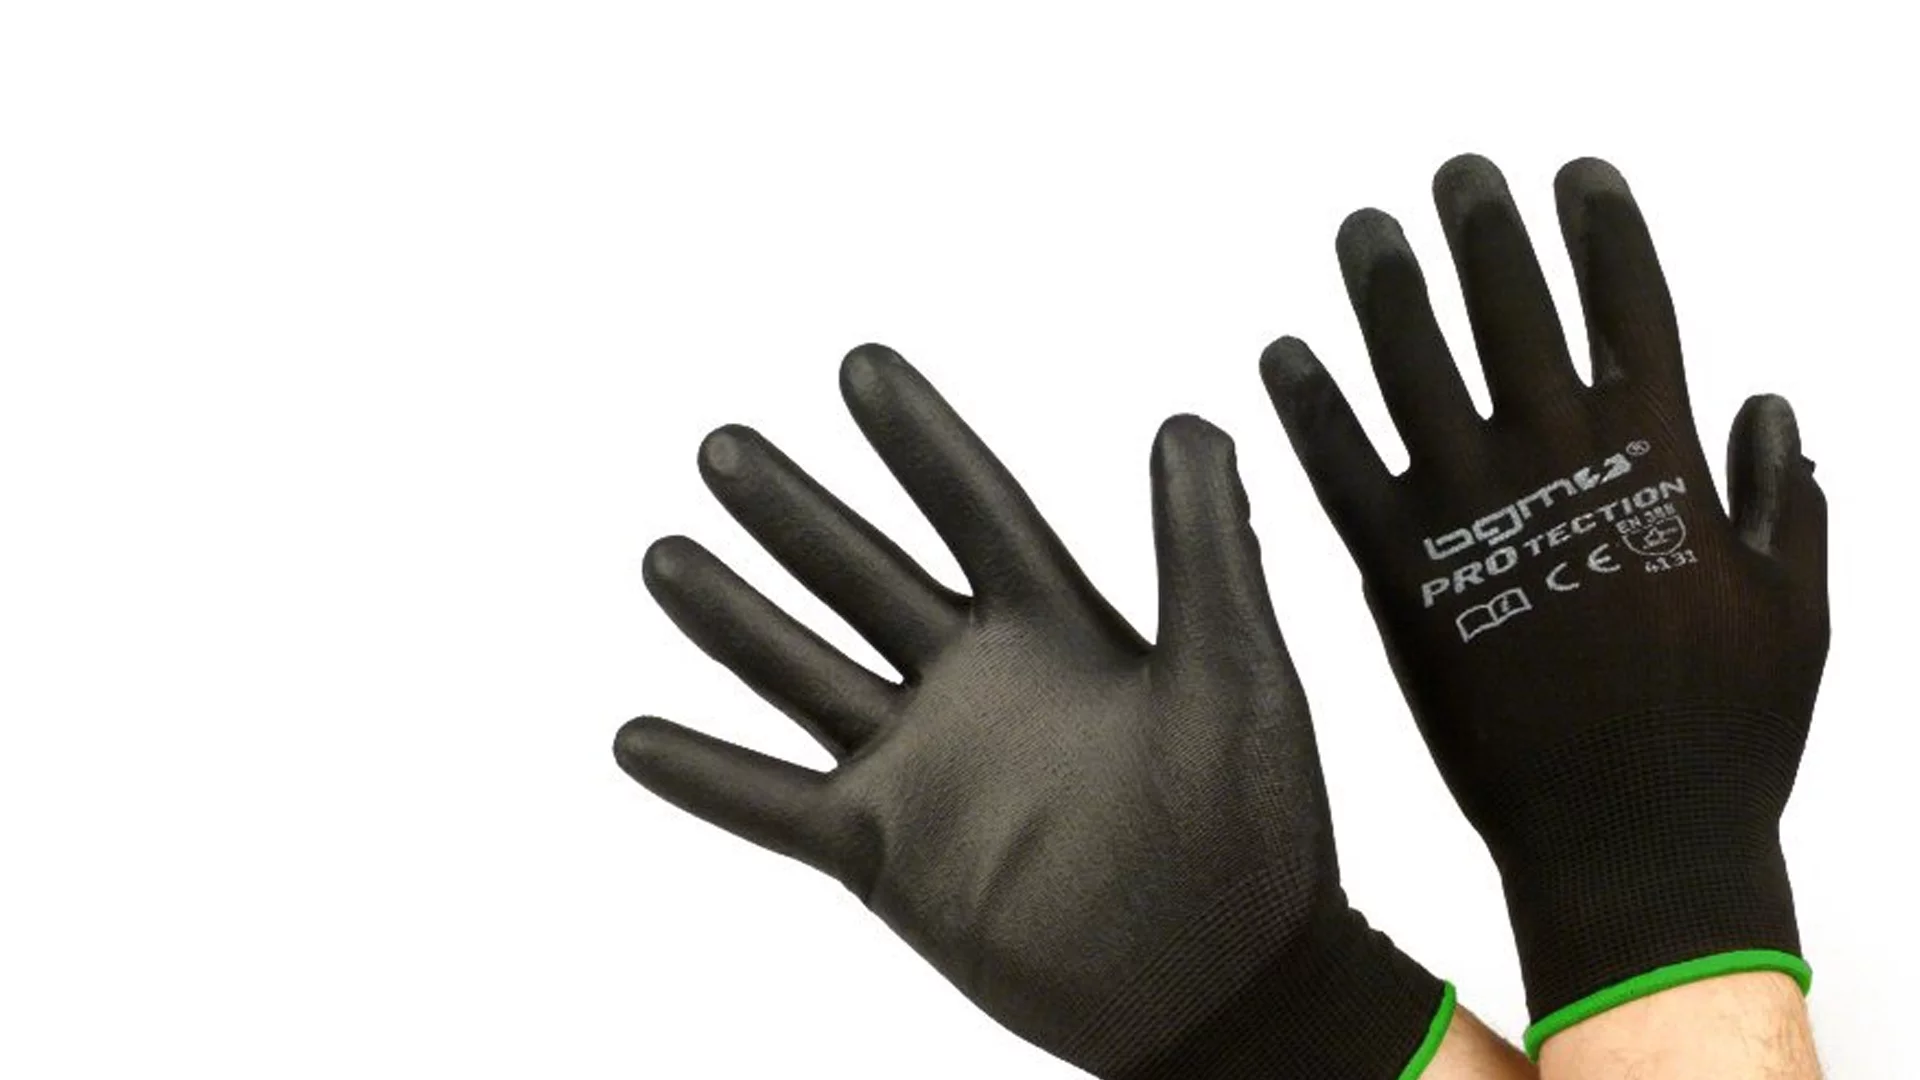 bgm protection assembly gloves